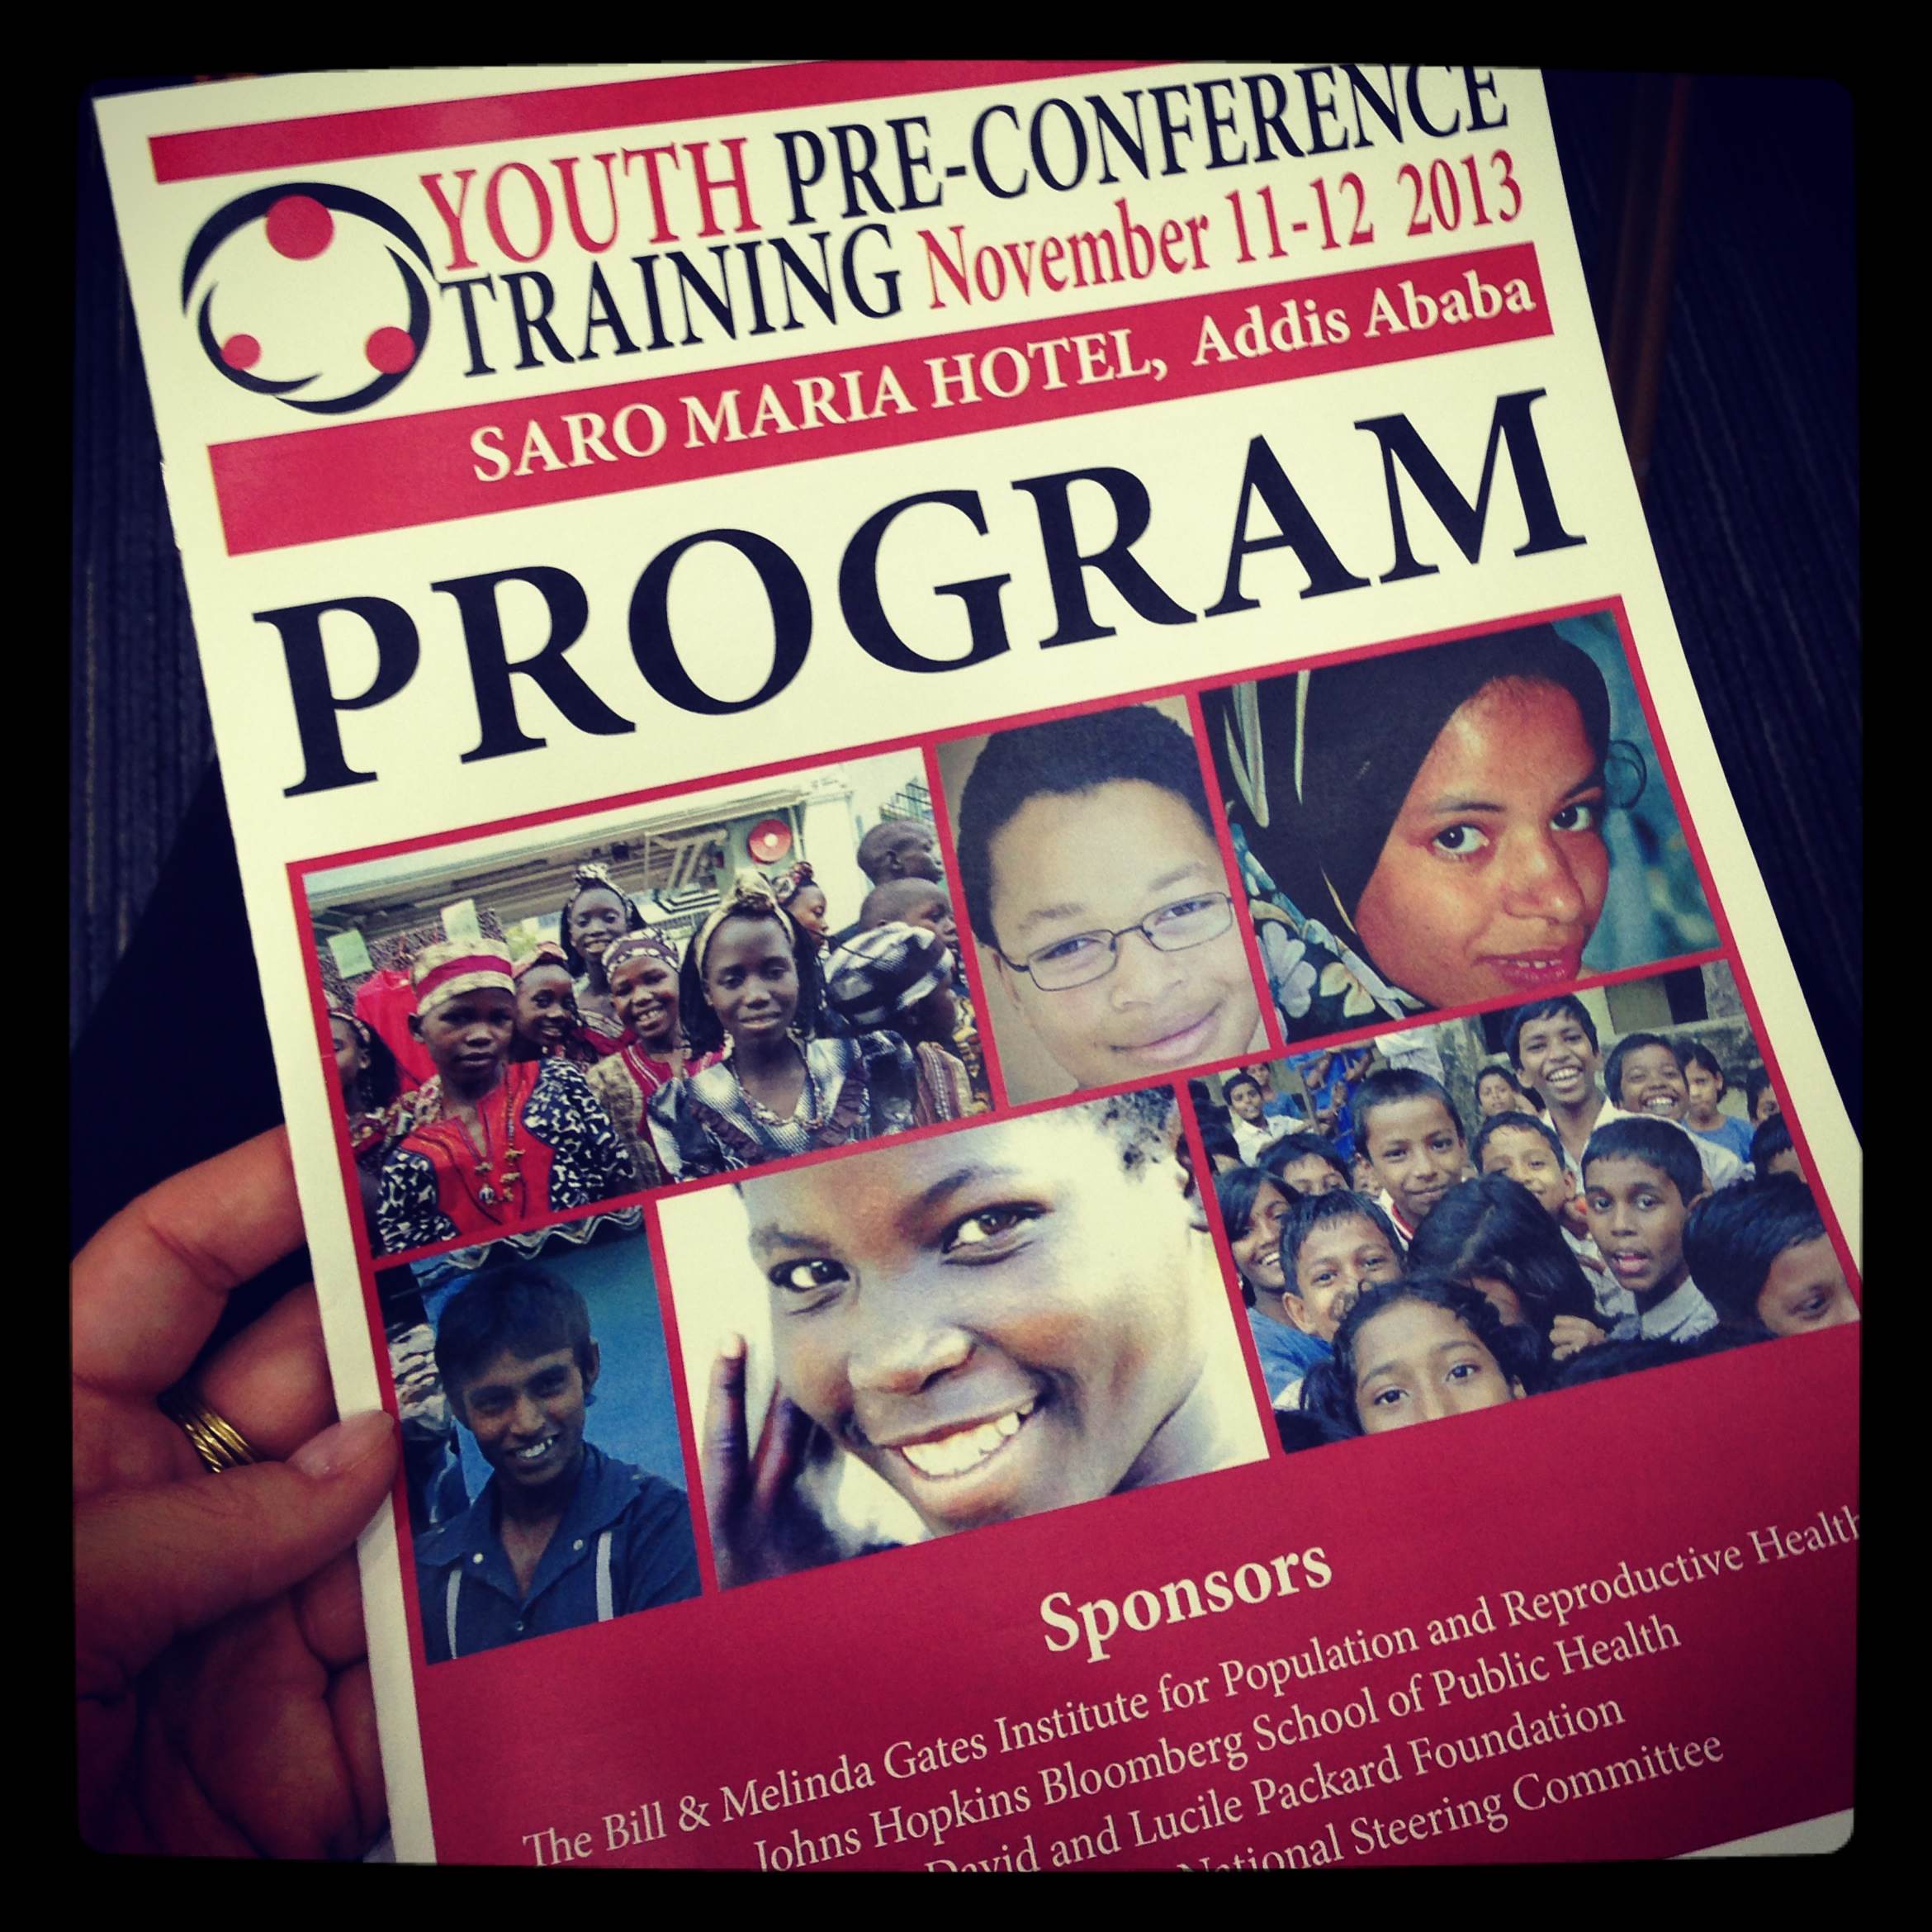 ICFP Youth Pre-Conference